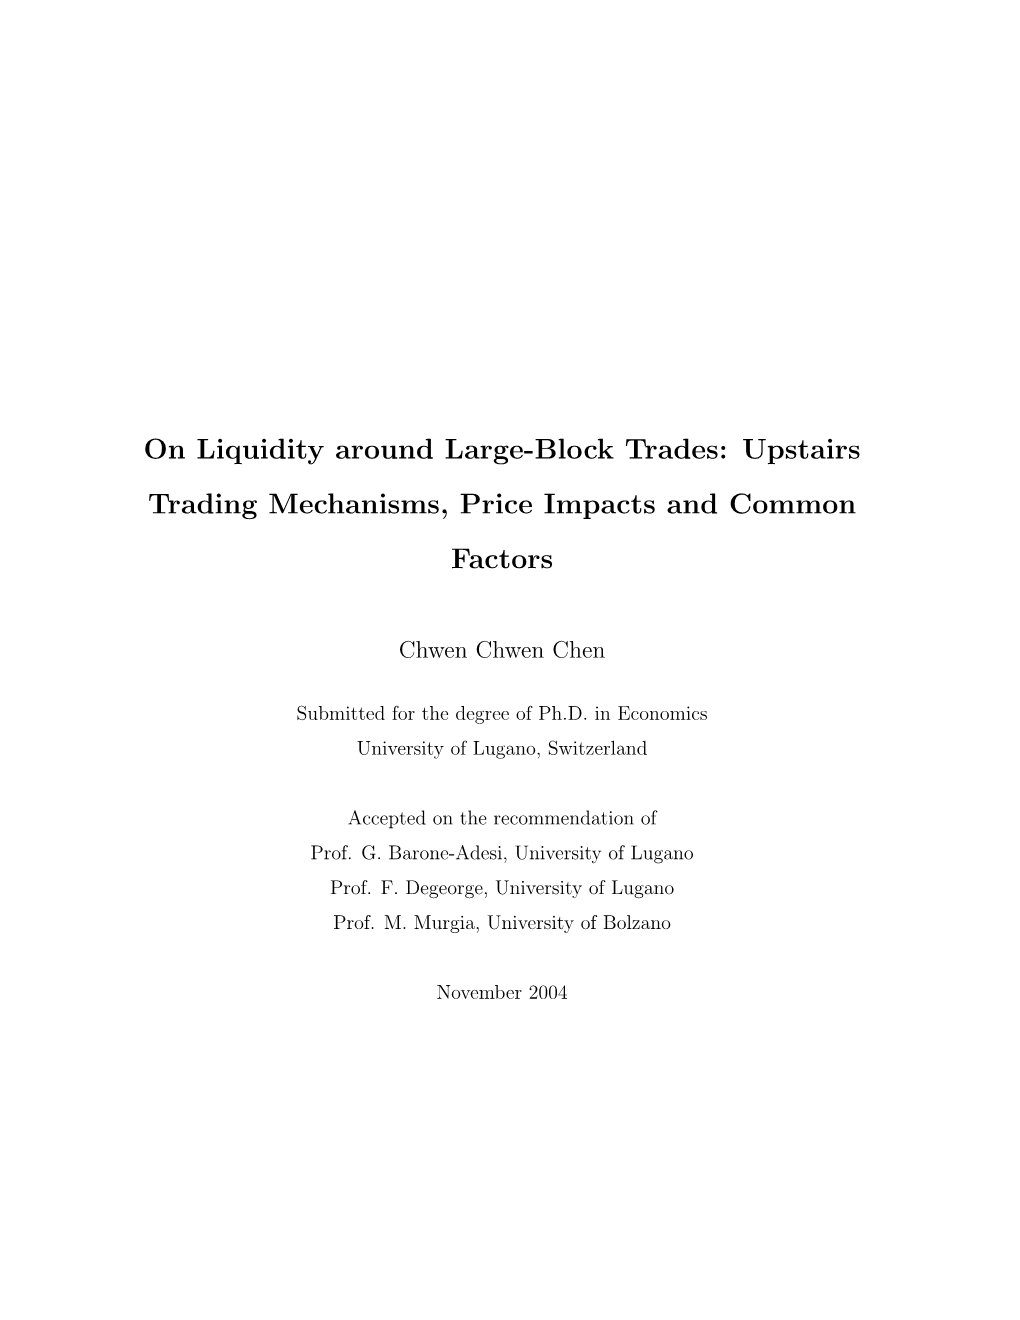 On Liquidity Around Large-Block Trades: Upstairs Trading Mechanisms, Price Impacts and Common Factors